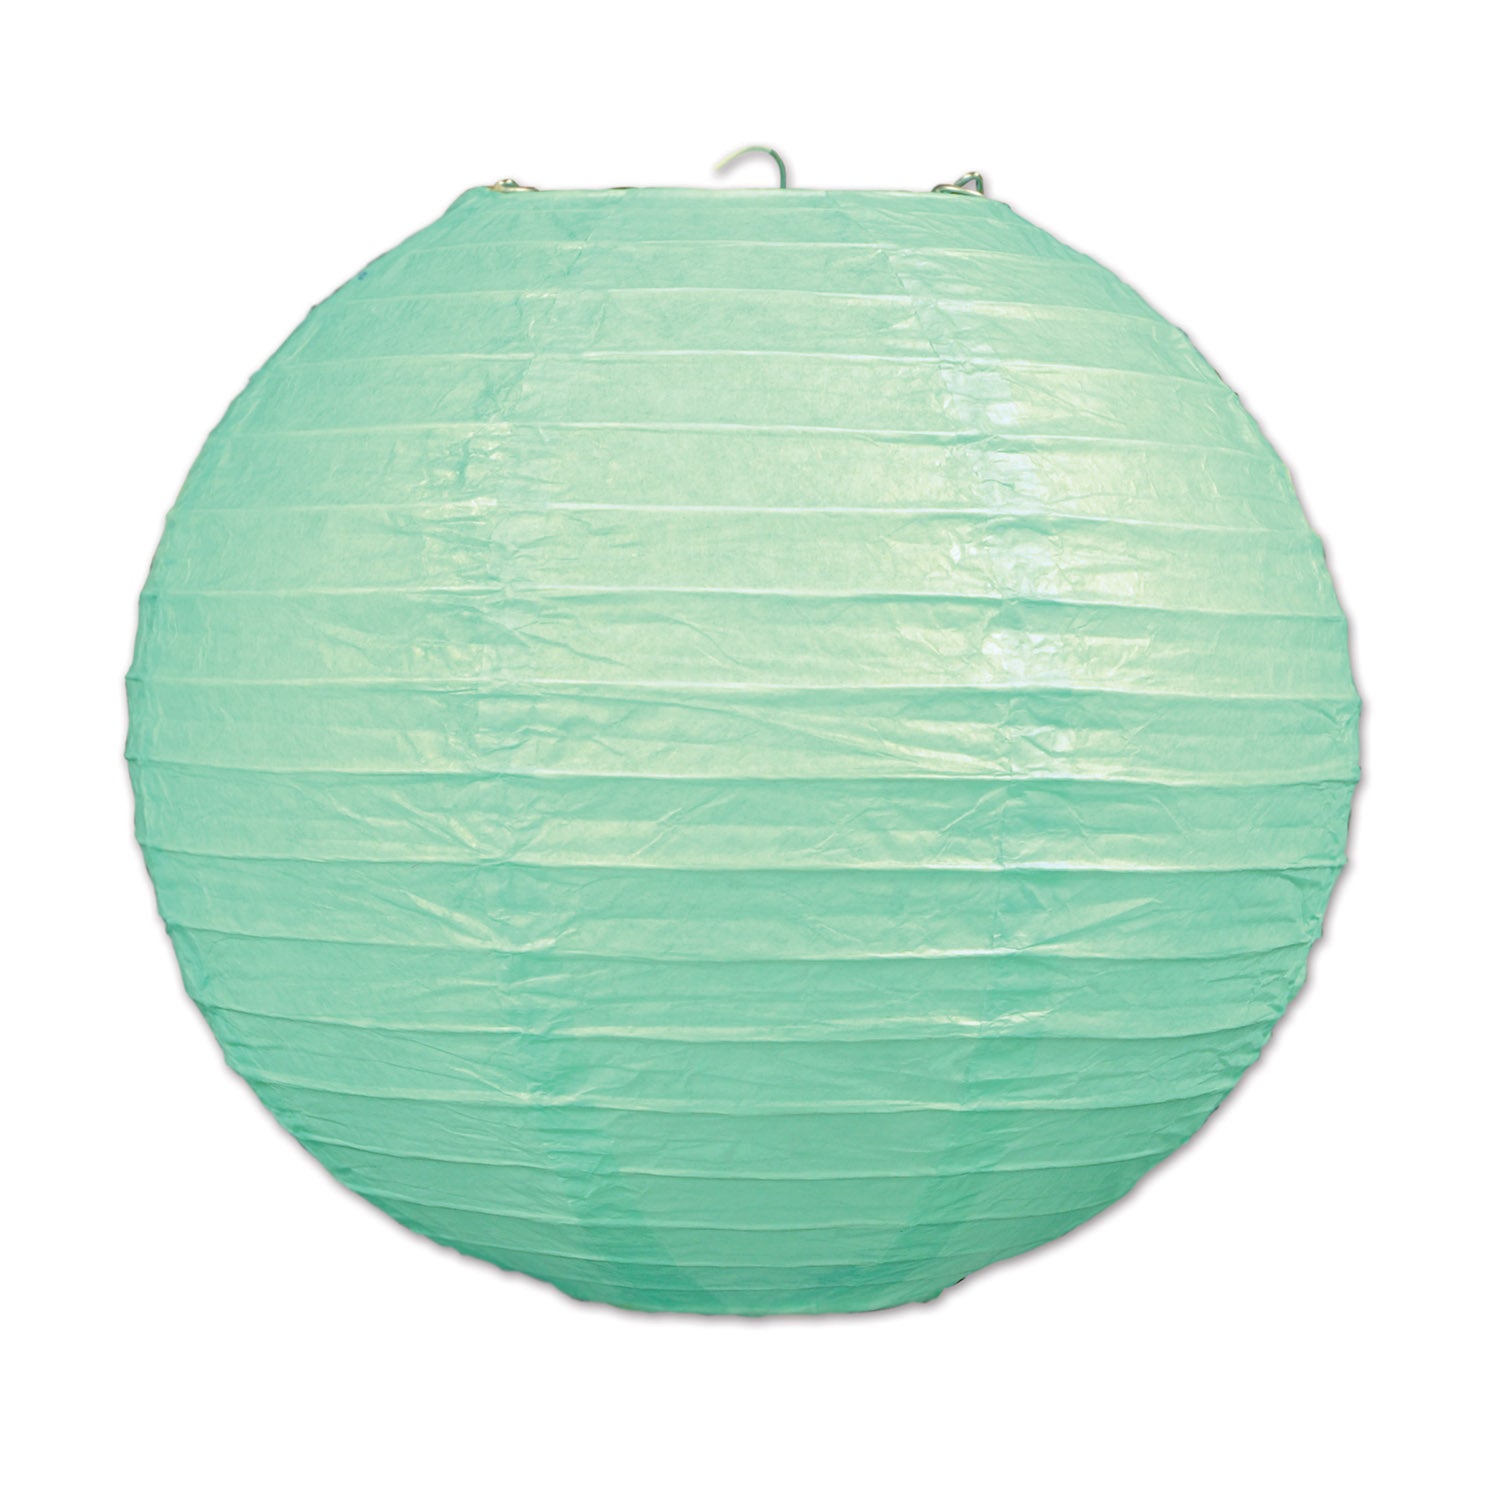 Paper Lanterns 9 1/2" - 1 Count | Clearance, While Supplies Last!